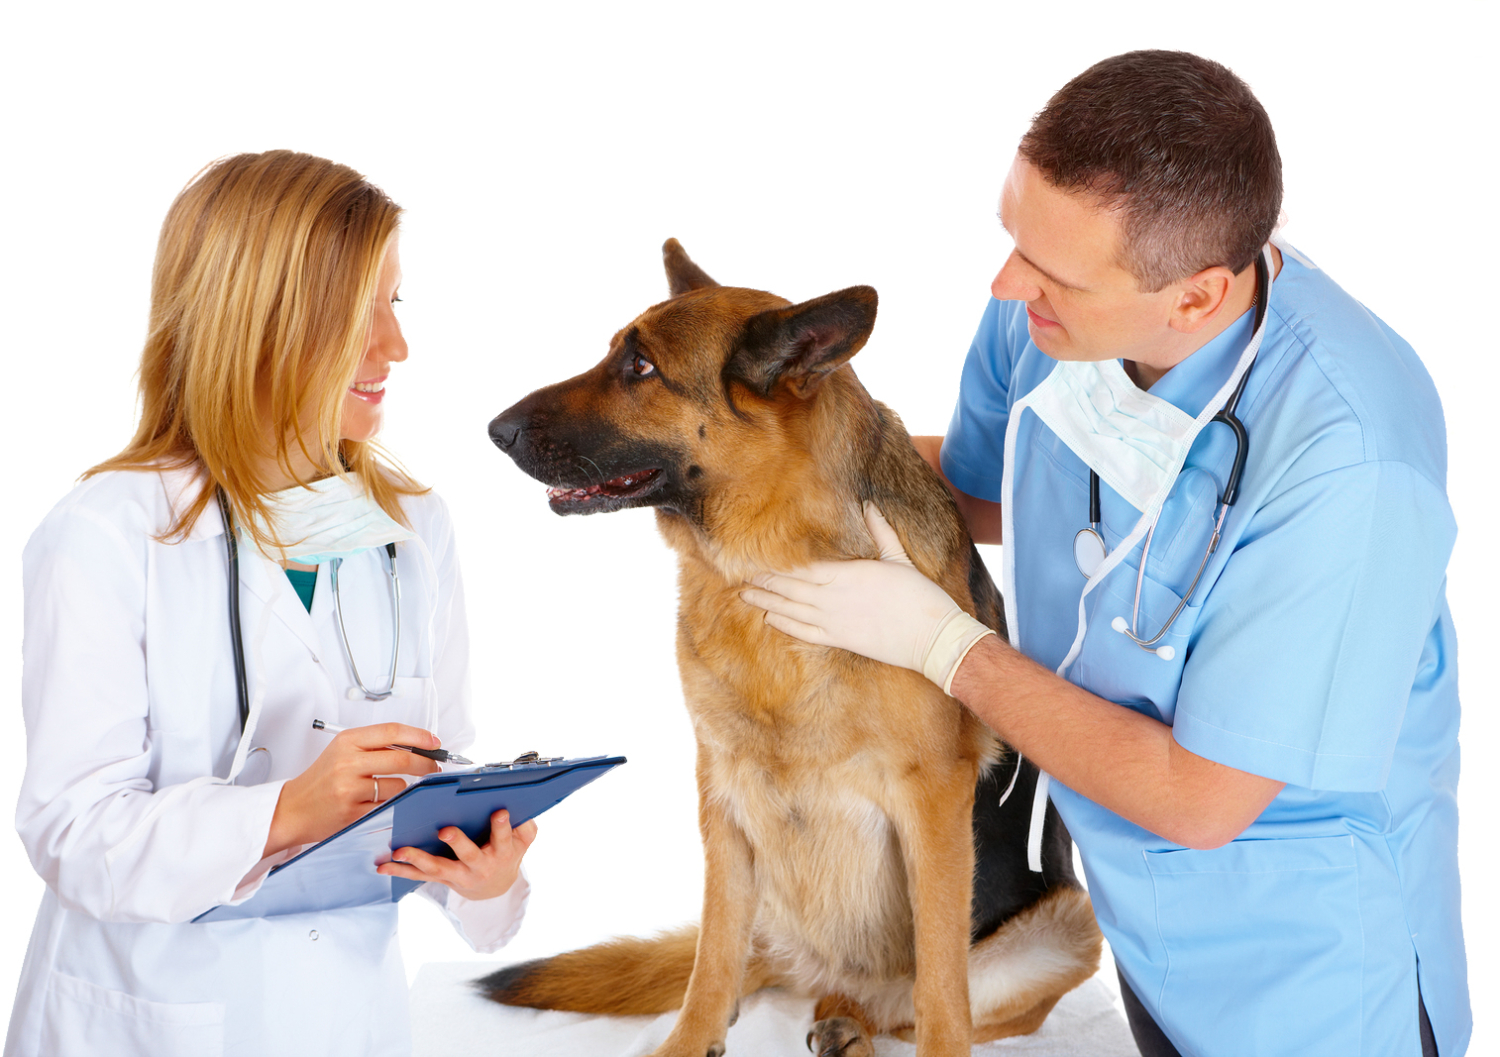 Librela for Dogs: How It Compares vs Other Treatments